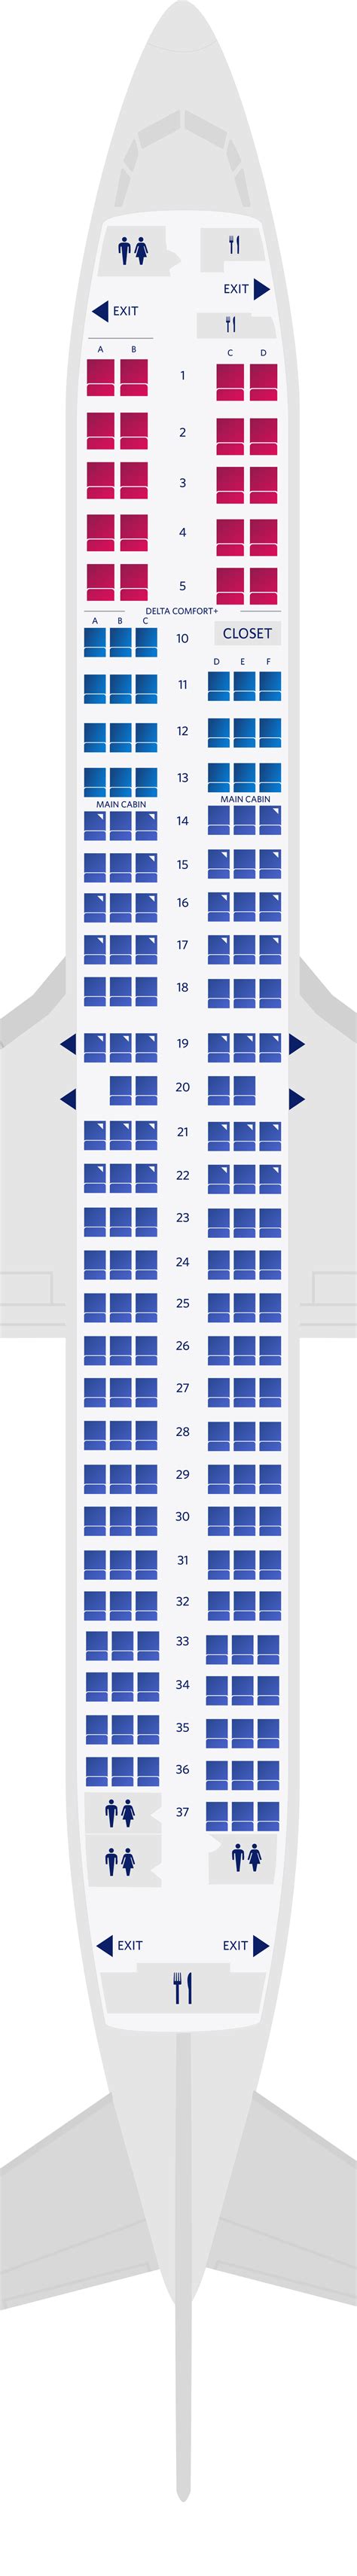 boeing 737 seating chart united